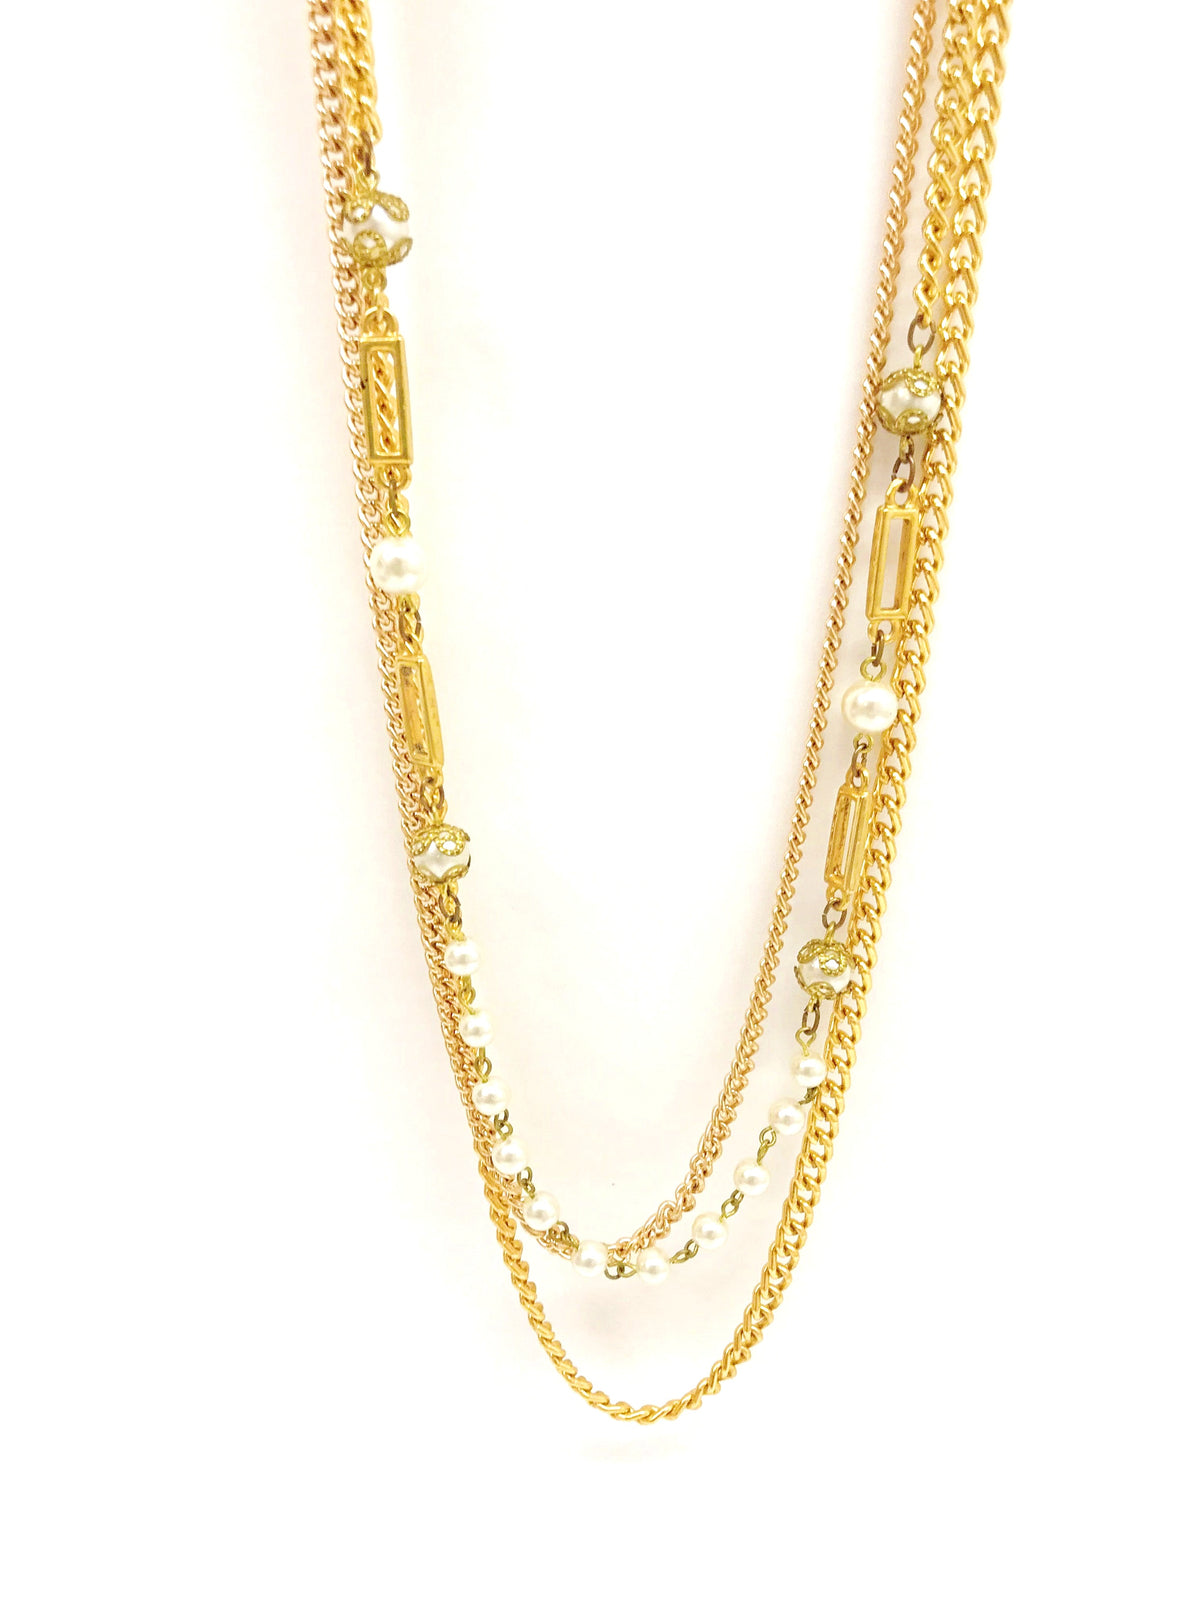 Vintage Triple Strand Chain Link Necklace with Faux Pearls - Hers and His Treasures